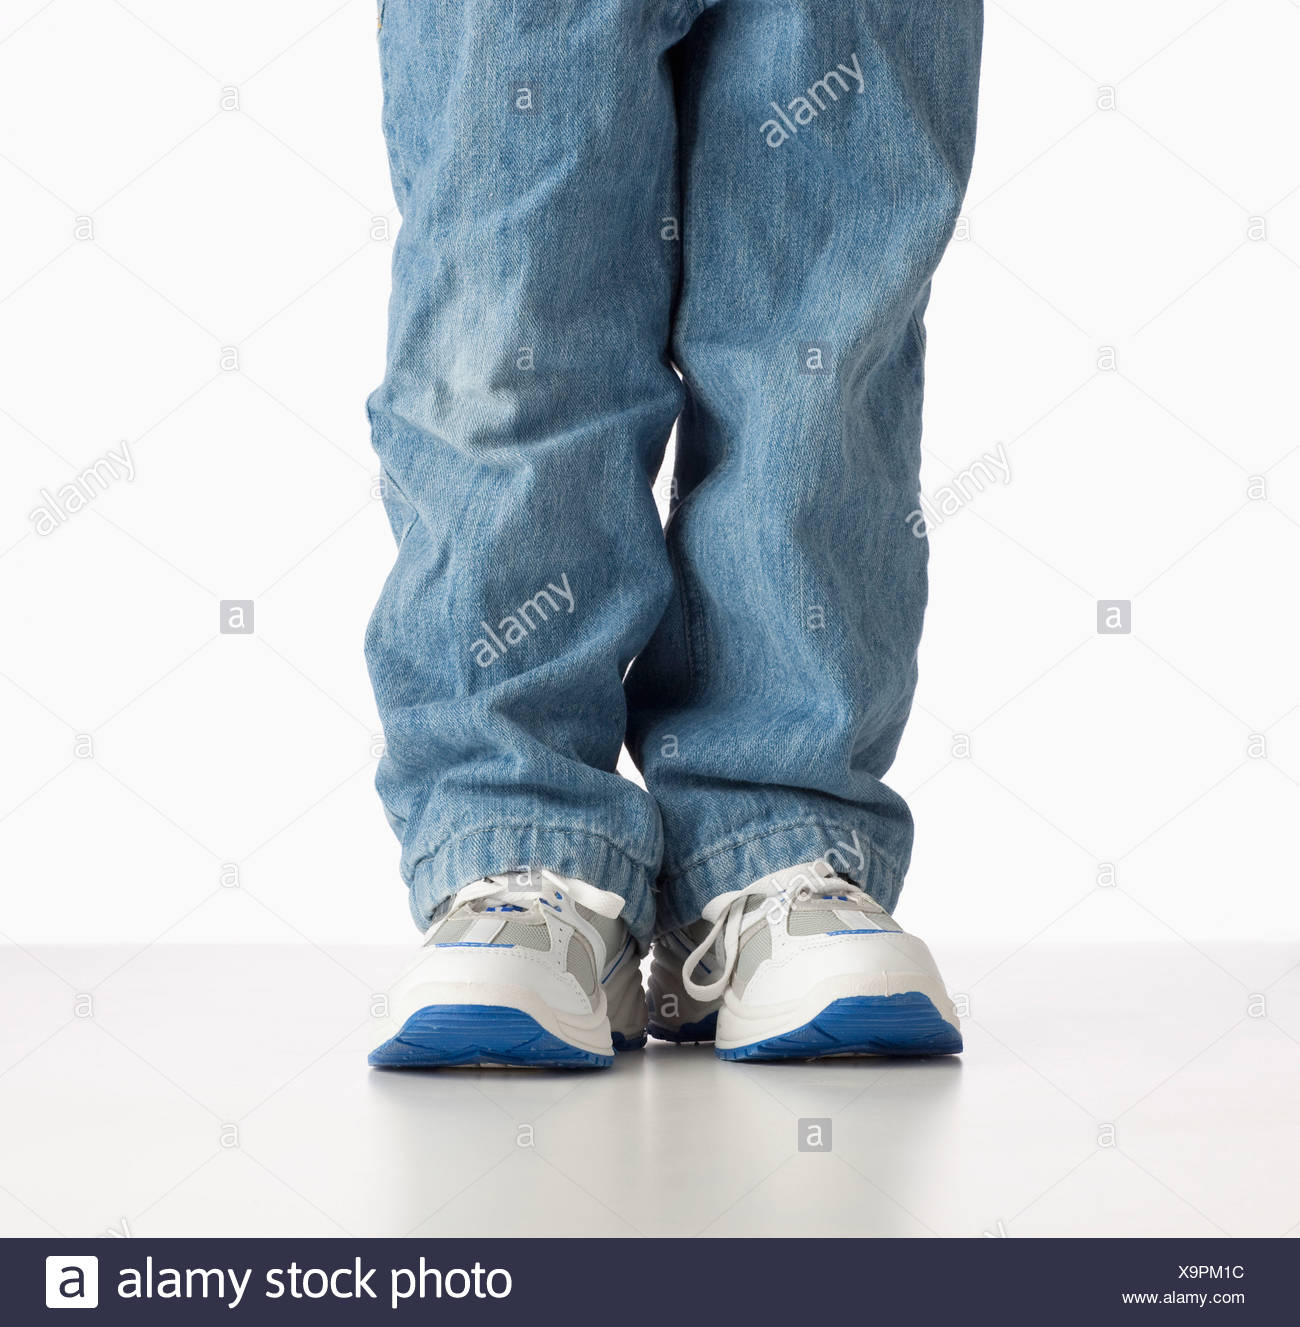 jeans and running shoes